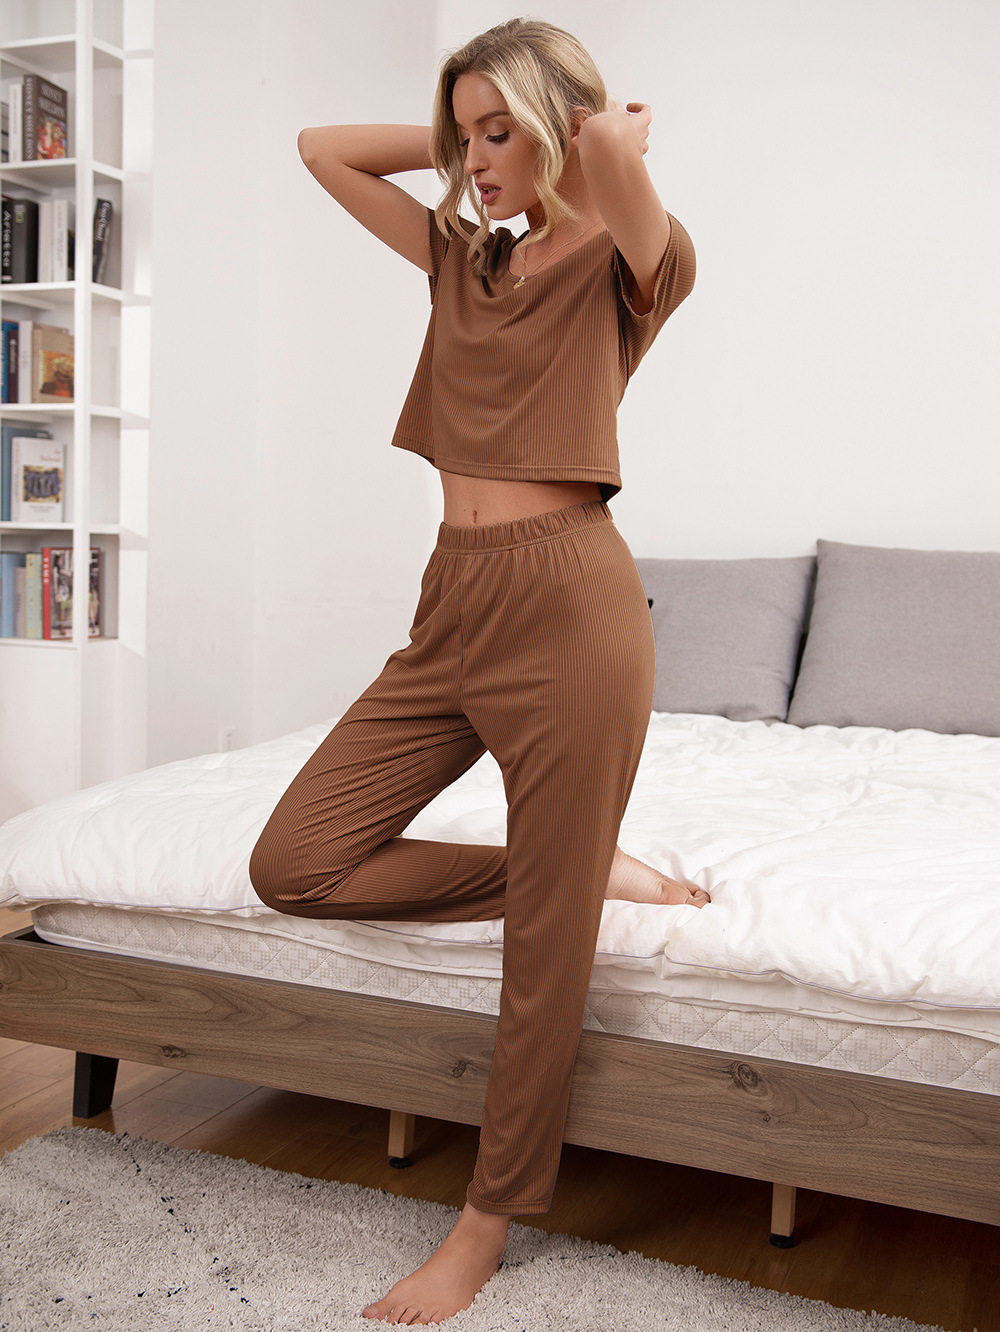 Women's Loungewear Short Sleeve Round Neck Top Trousers Casual Suit shopper-ever.myshopify.com